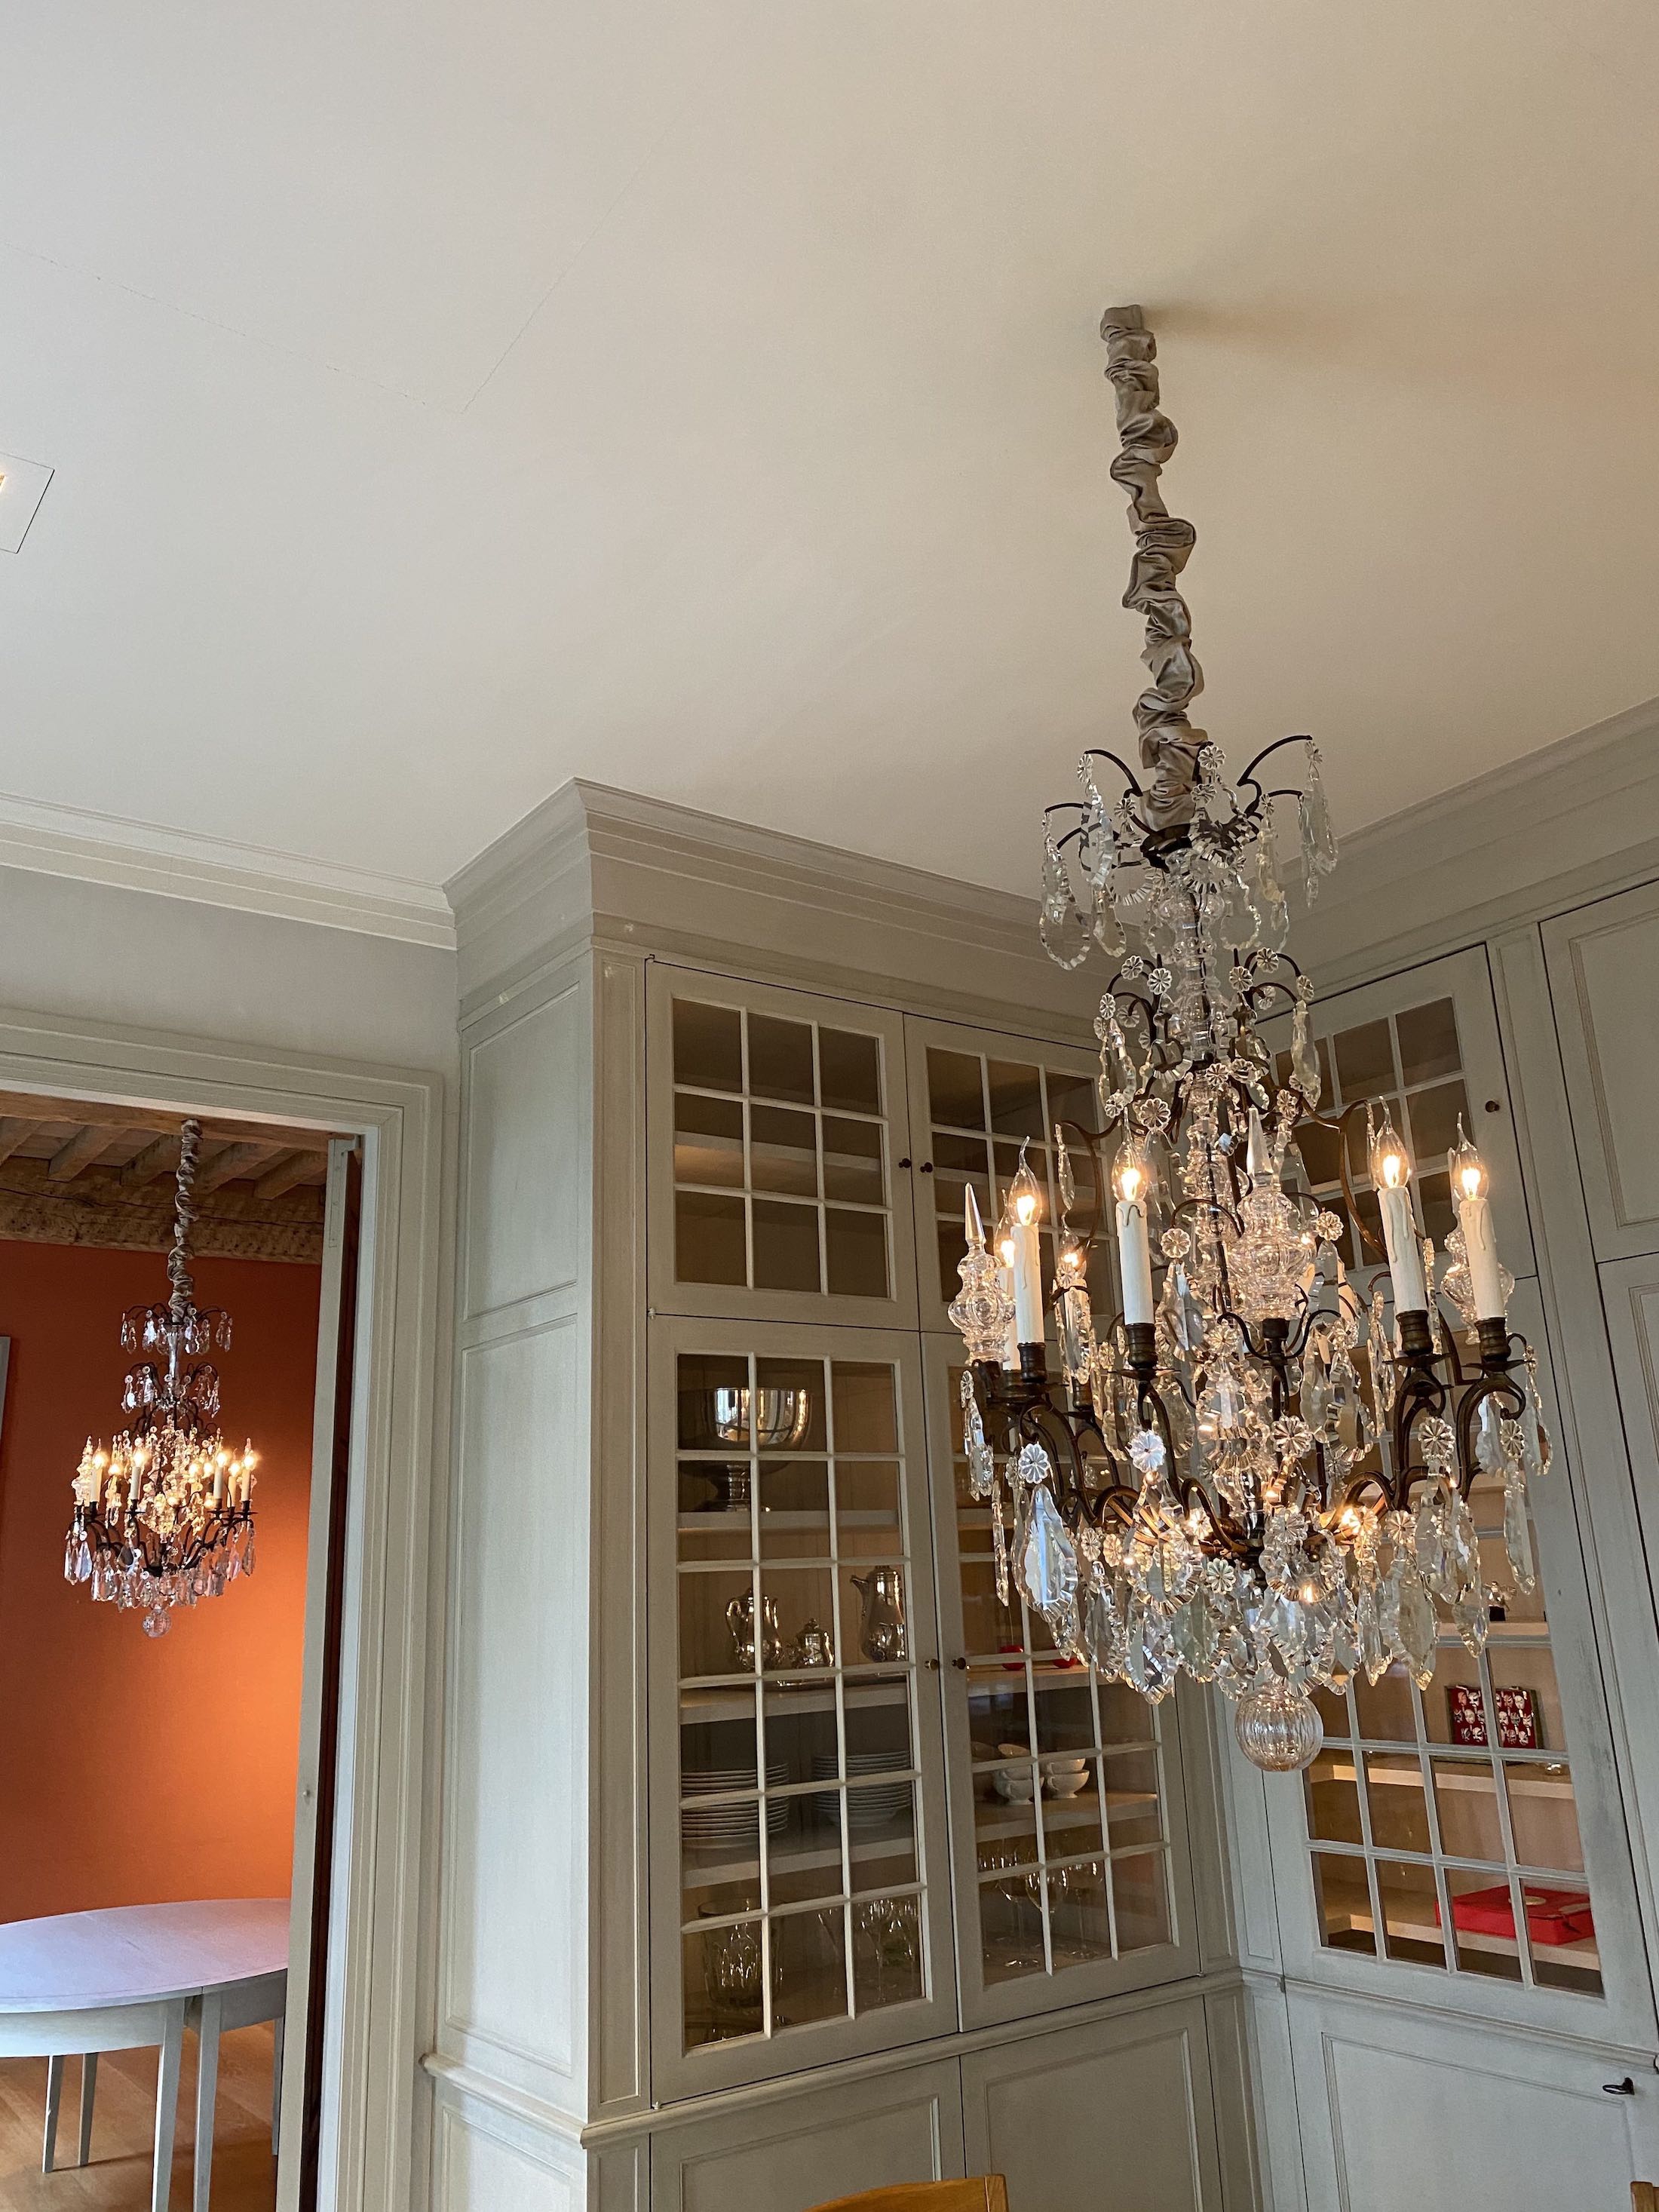 French chandeliers in the dining room- from Galerie Anna van Elteren